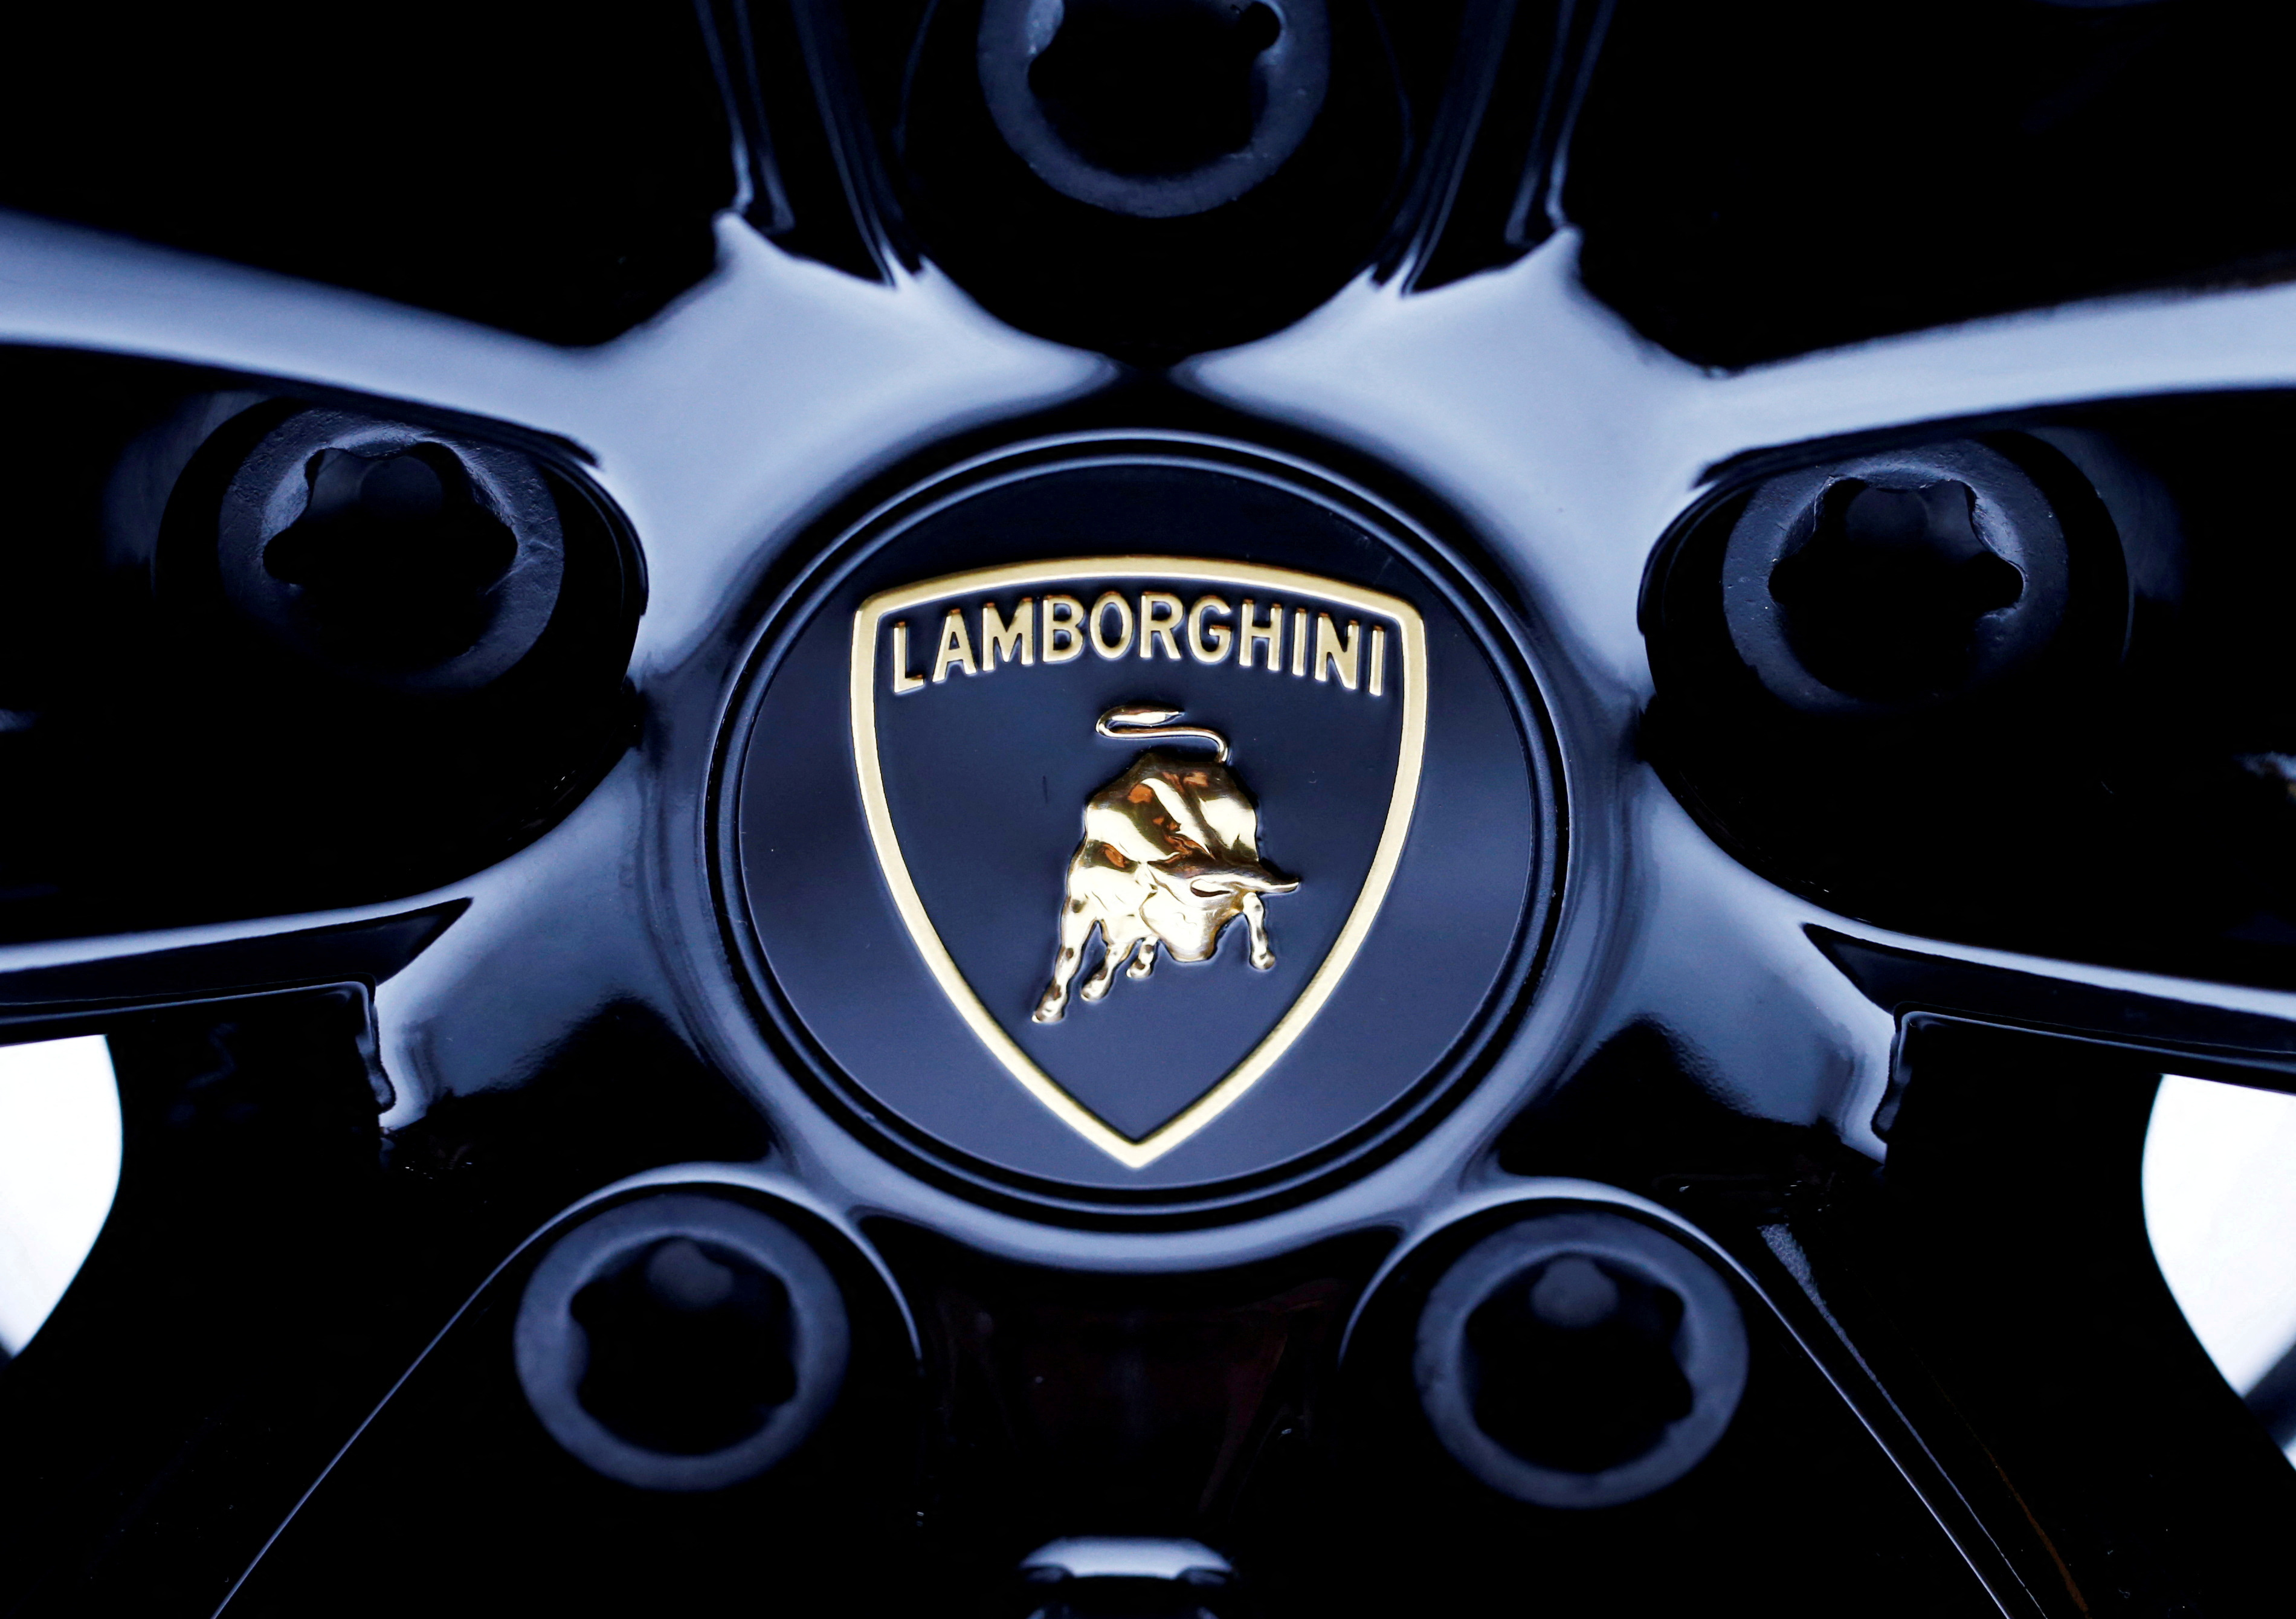 The wheel hub of a Lamborghini car is seen during the 87th International Motor Show at Palexpo in Geneva